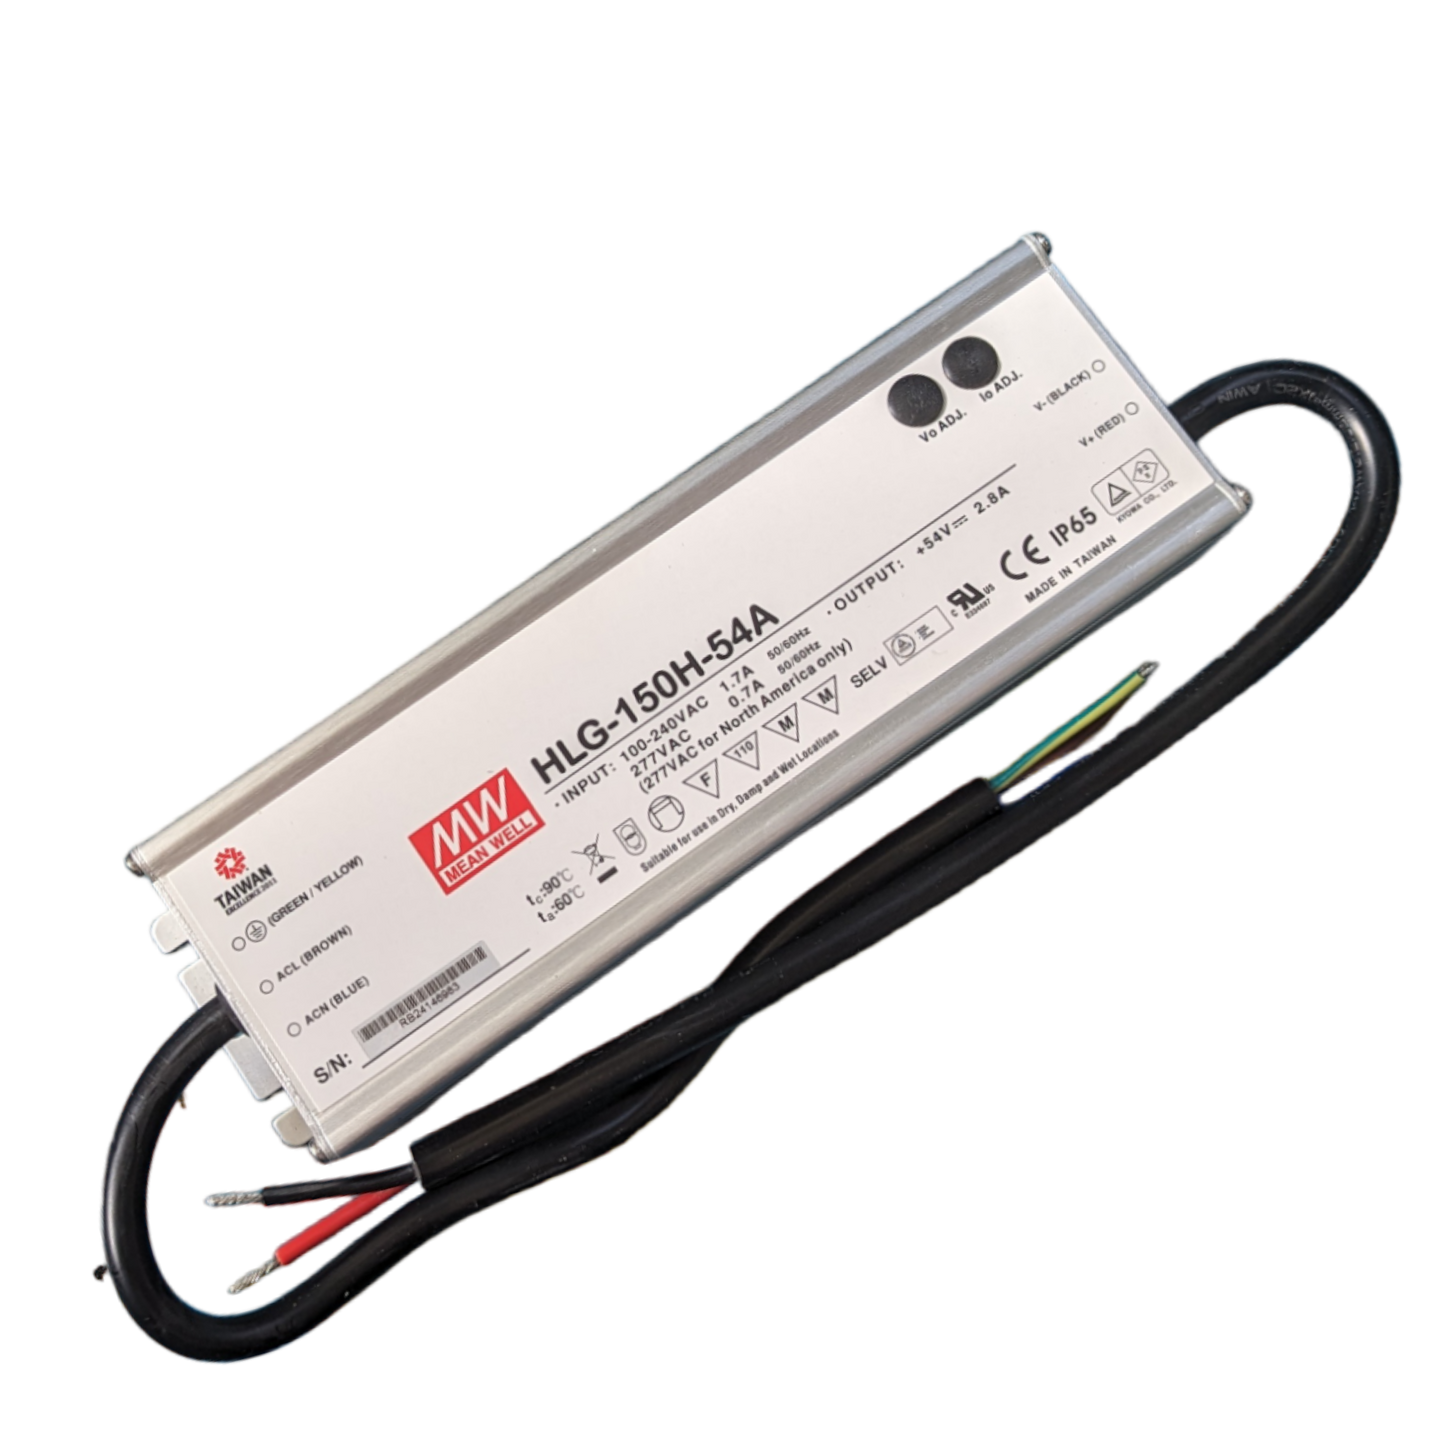 Meanwell HLG-120H-54A LED Driver